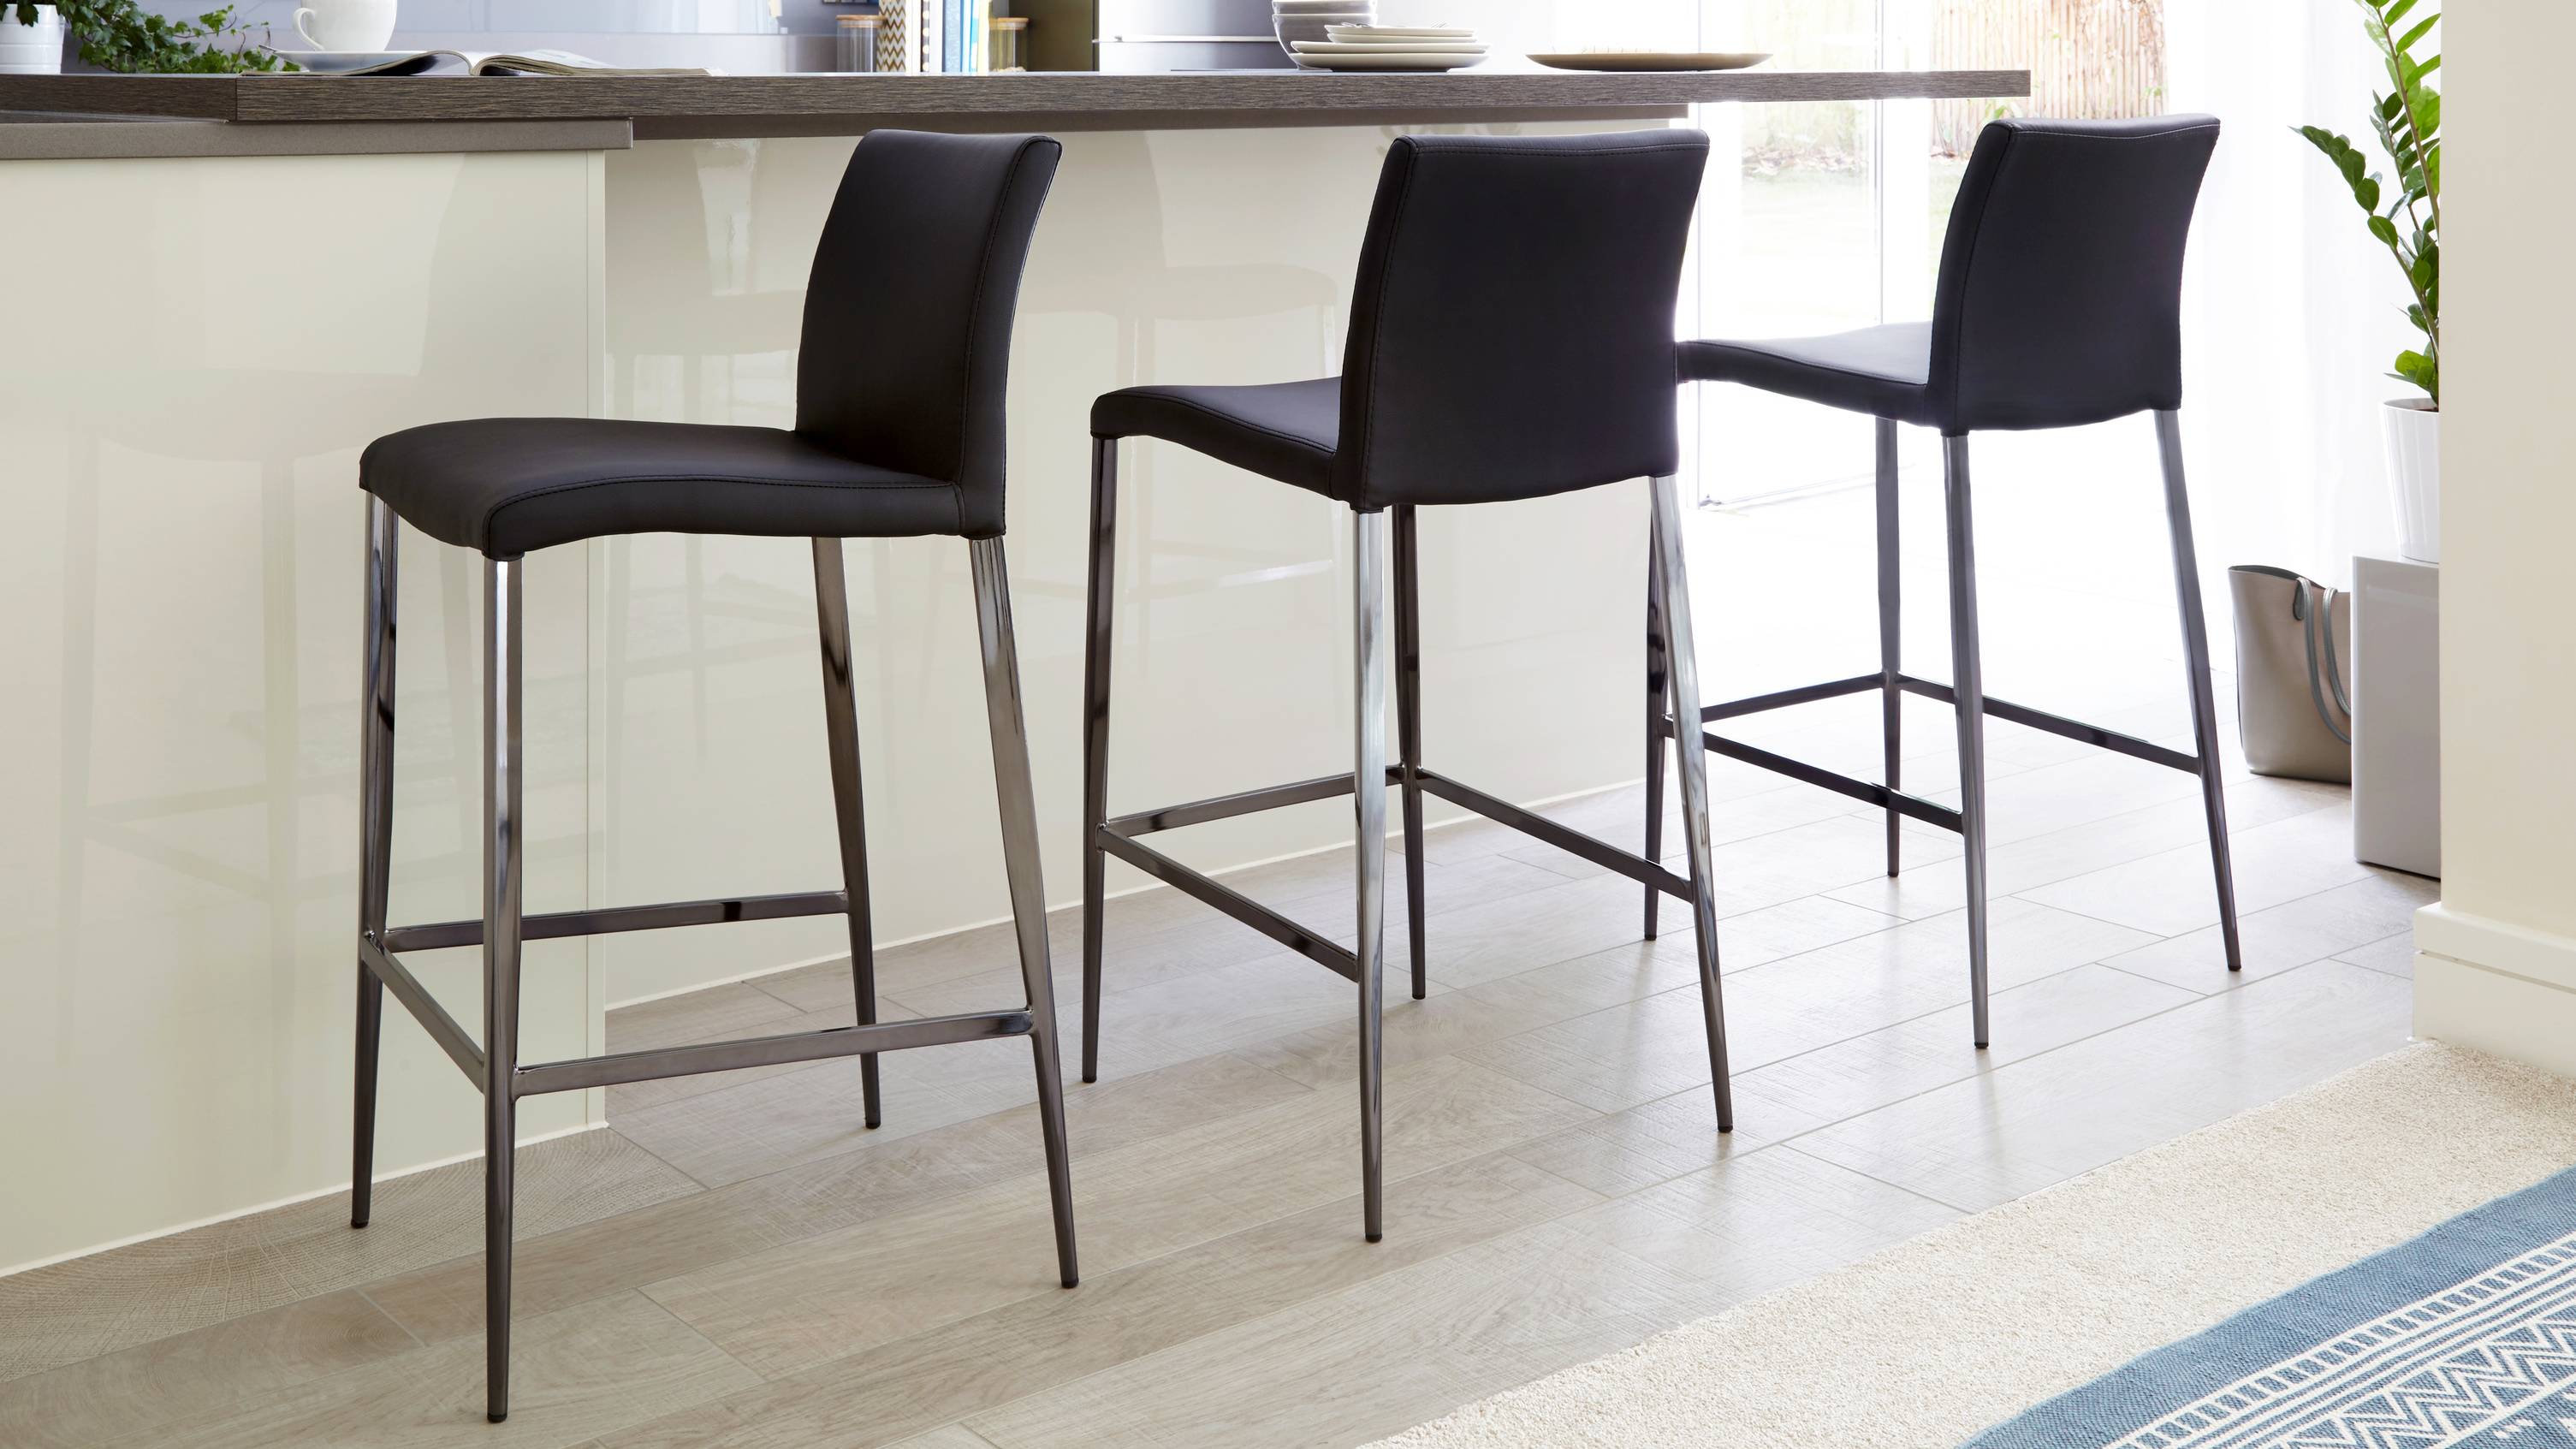 Fixed height black chrome barstools | UK Delivery